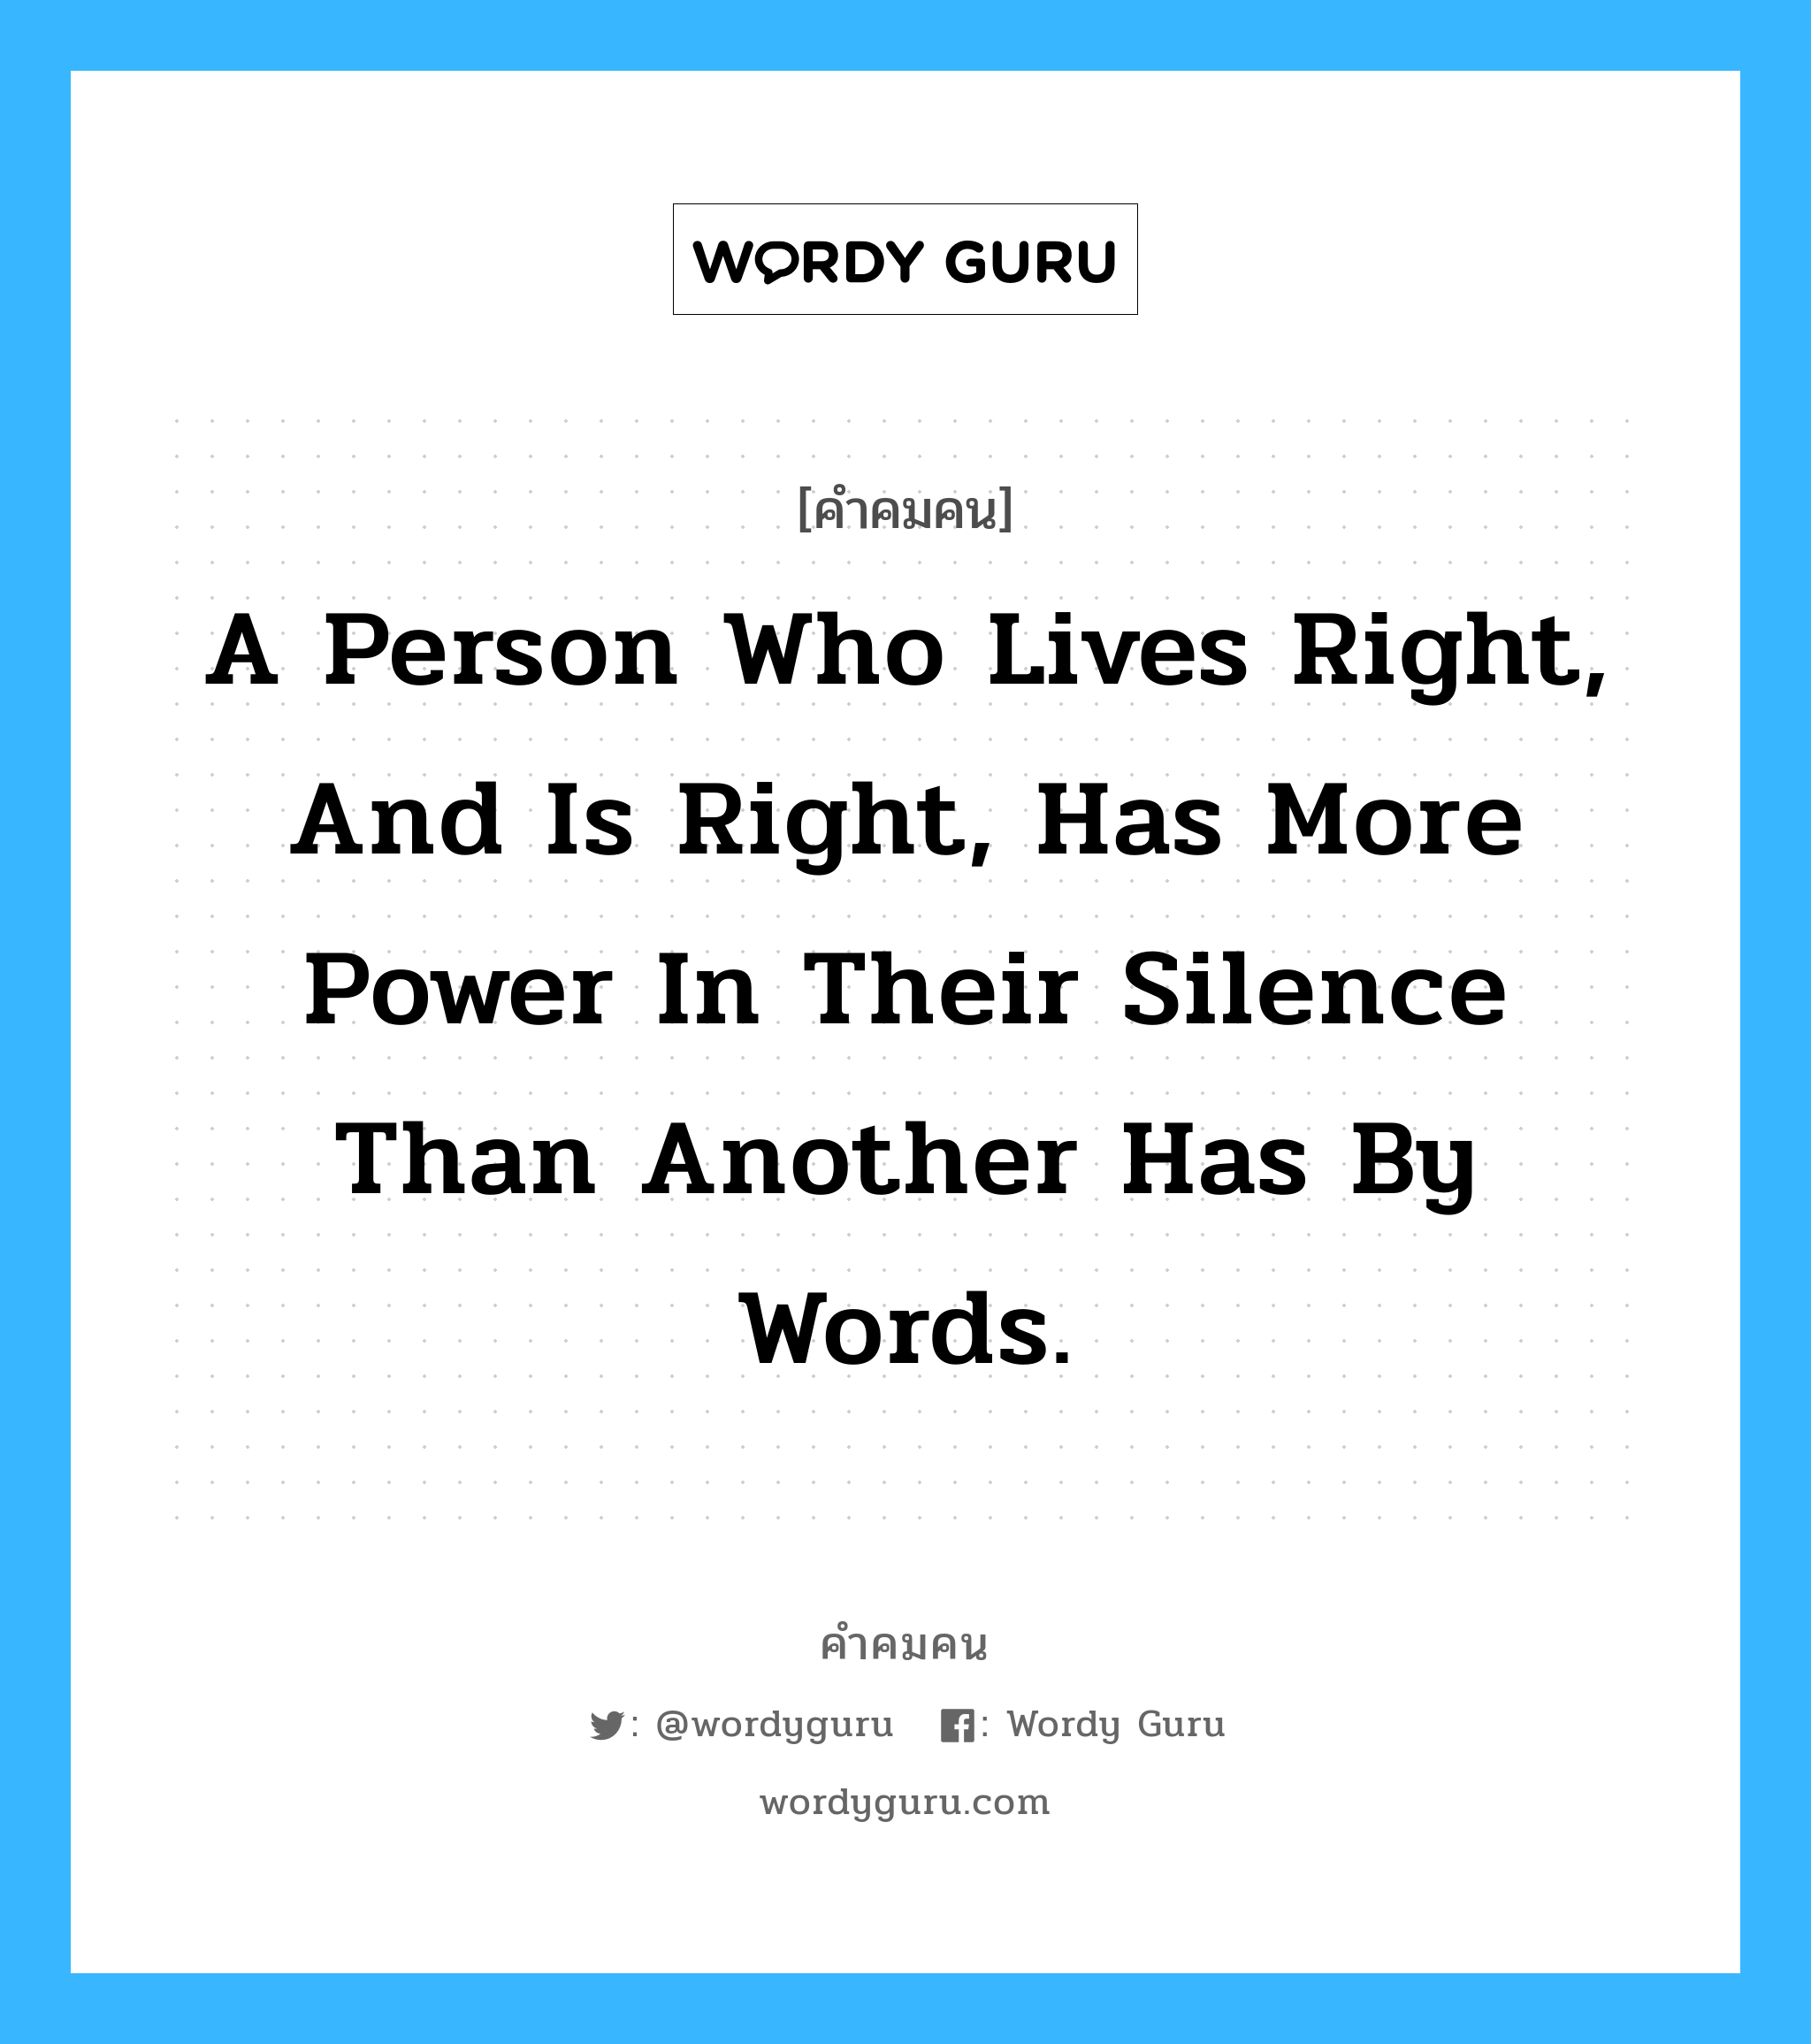 A person who lives right, and is right, has more power in their silence than another has by words., คำคมคน A person who lives right, and is right, has more power in their silence than another has by words. บุคคลที่มีชีวิตอยู่อย่างถูกต้องและเหมาะสมแม้อยู่ในความเงียบก็แลมีอำนาจกว่าผู้อื่น Phillips Brook หมวด Phillips Brook